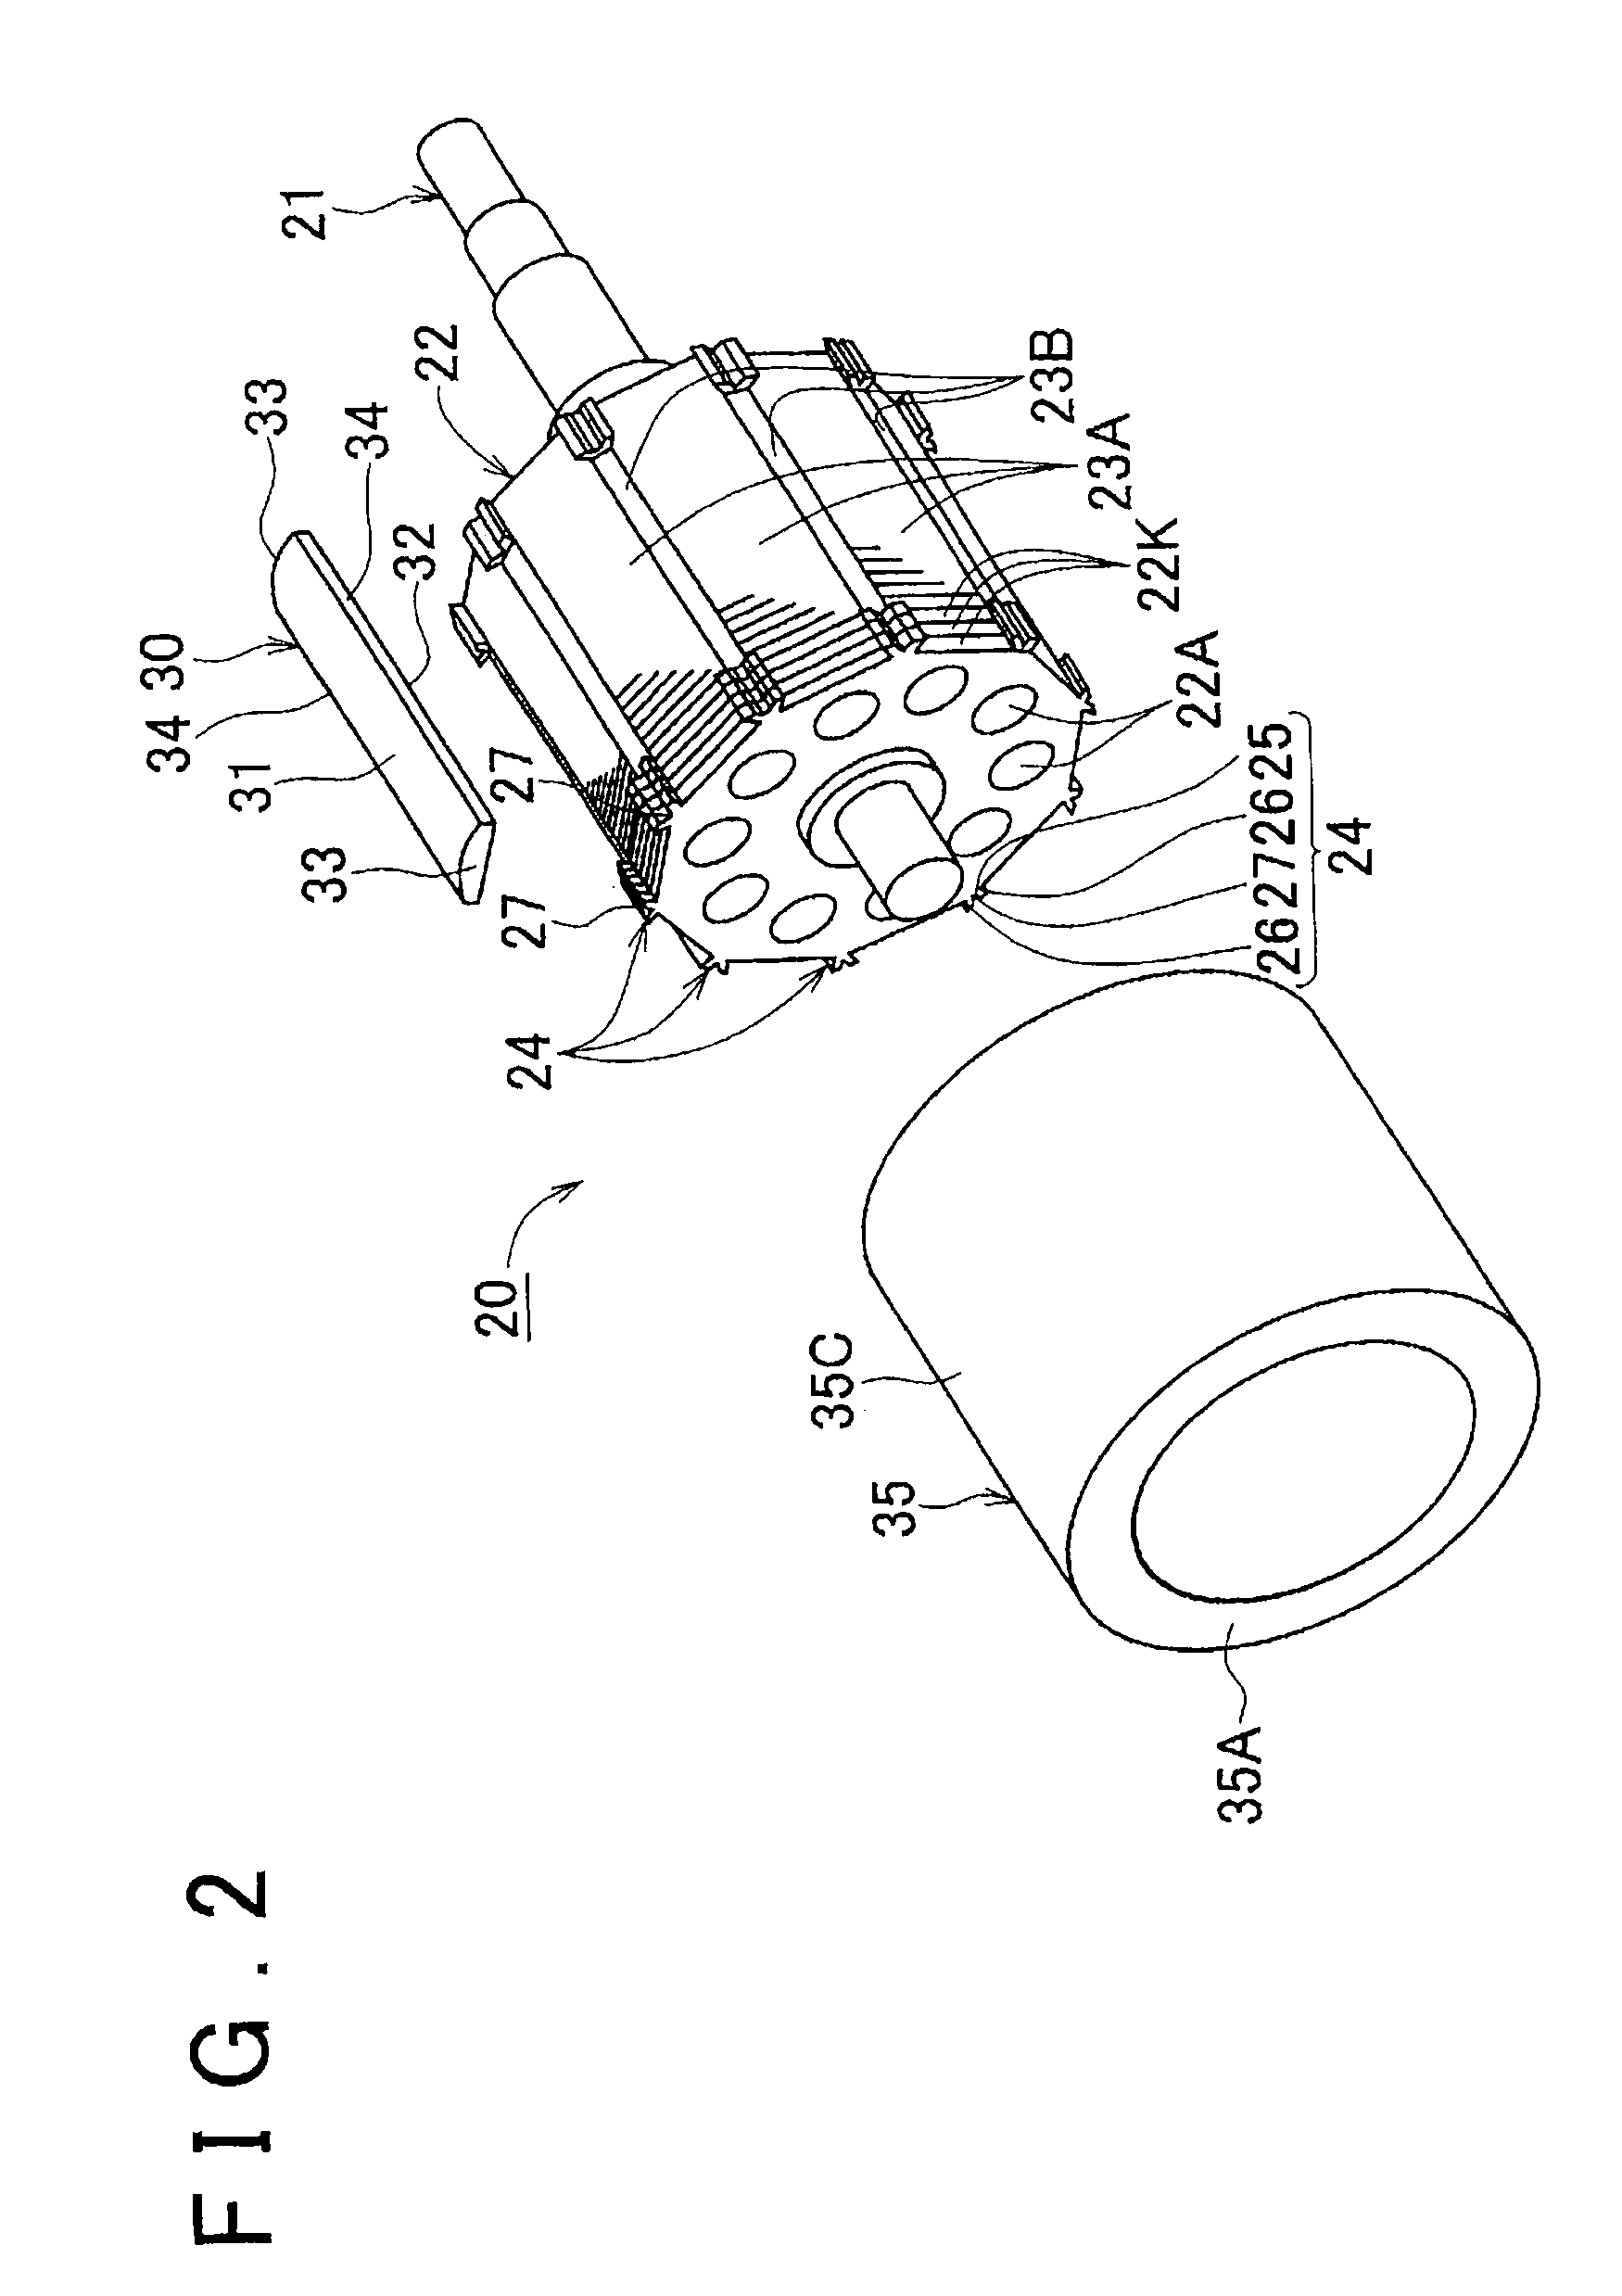 Motor rotor, having magnet holding projections